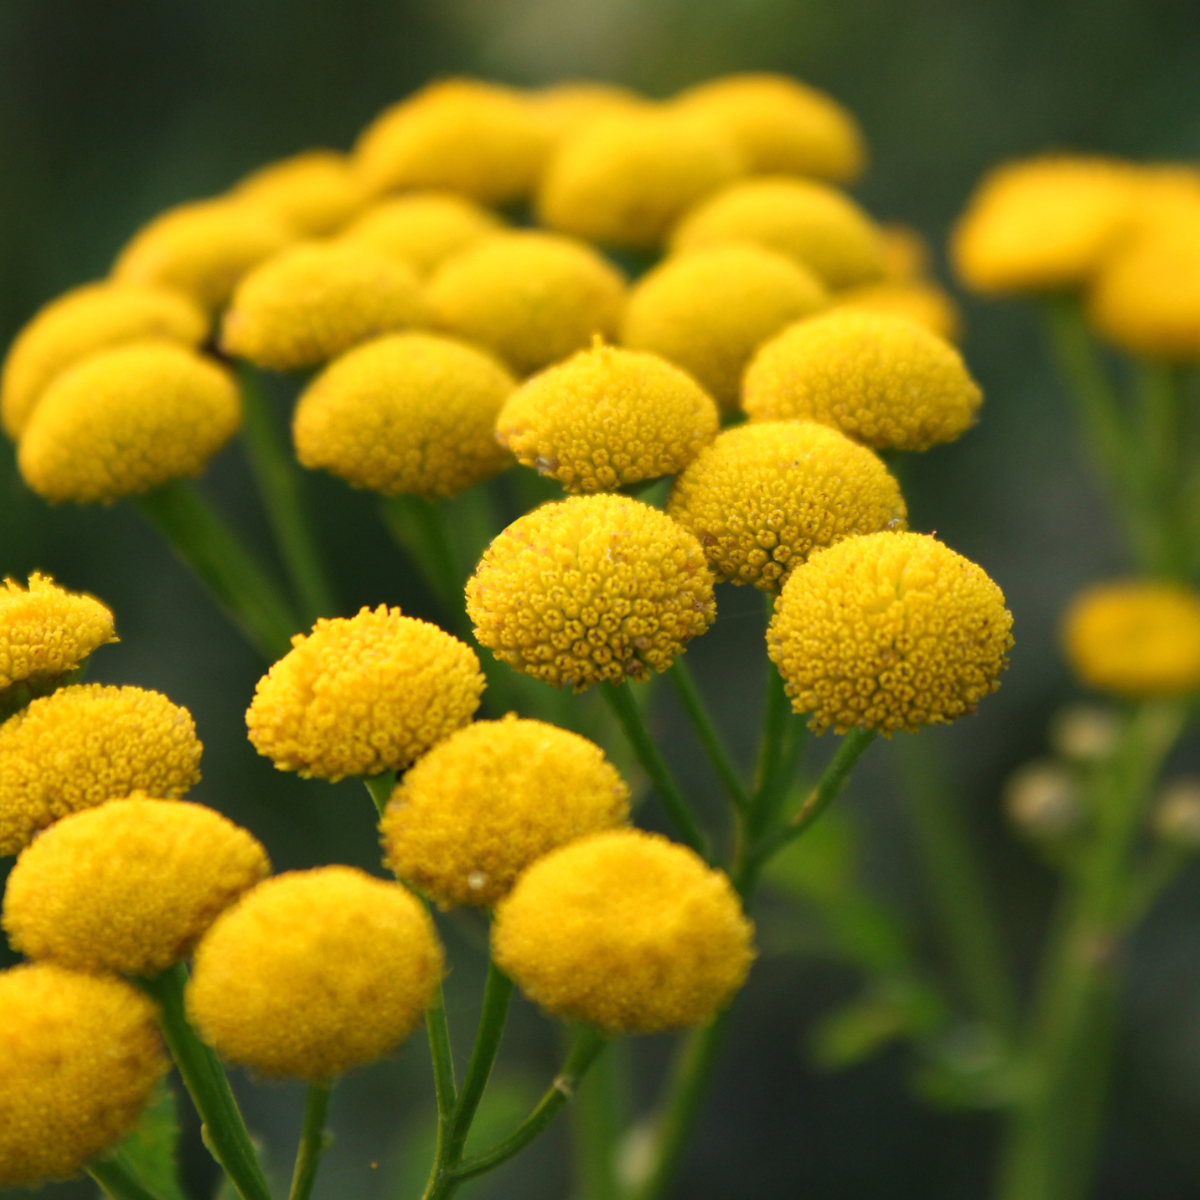 BLUE TANSY, THE NEW SKINCARE STAPLE: BENEFITS & HOW TO USE IT